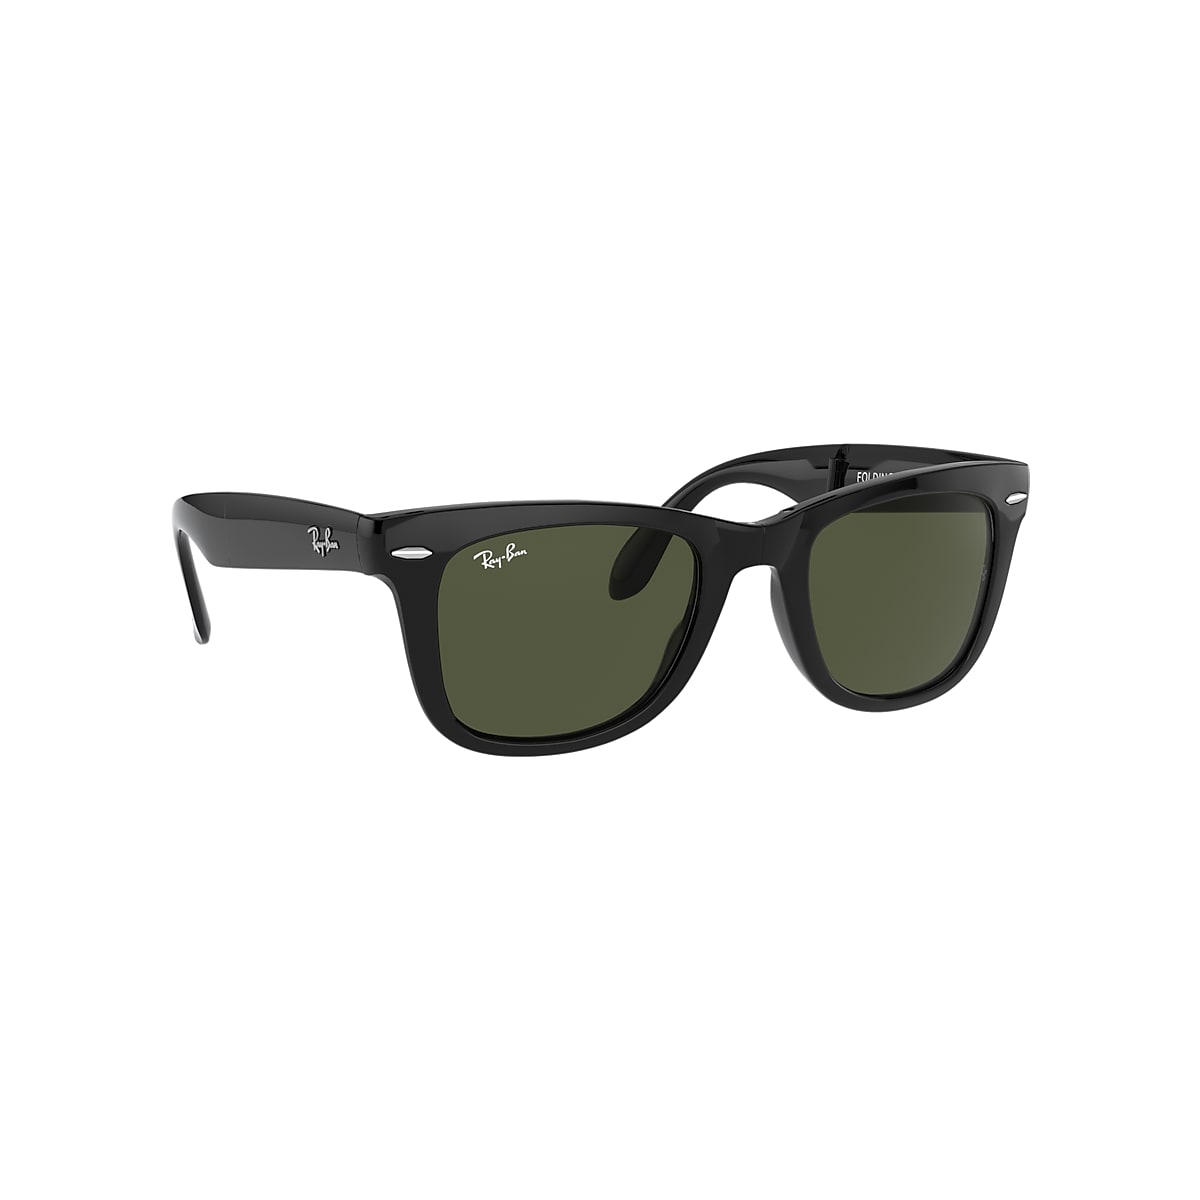 Klage dissipation Violin WAYFARER FOLDING CLASSIC Sunglasses in Black and Green - RB4105 | Ray-Ban®  US